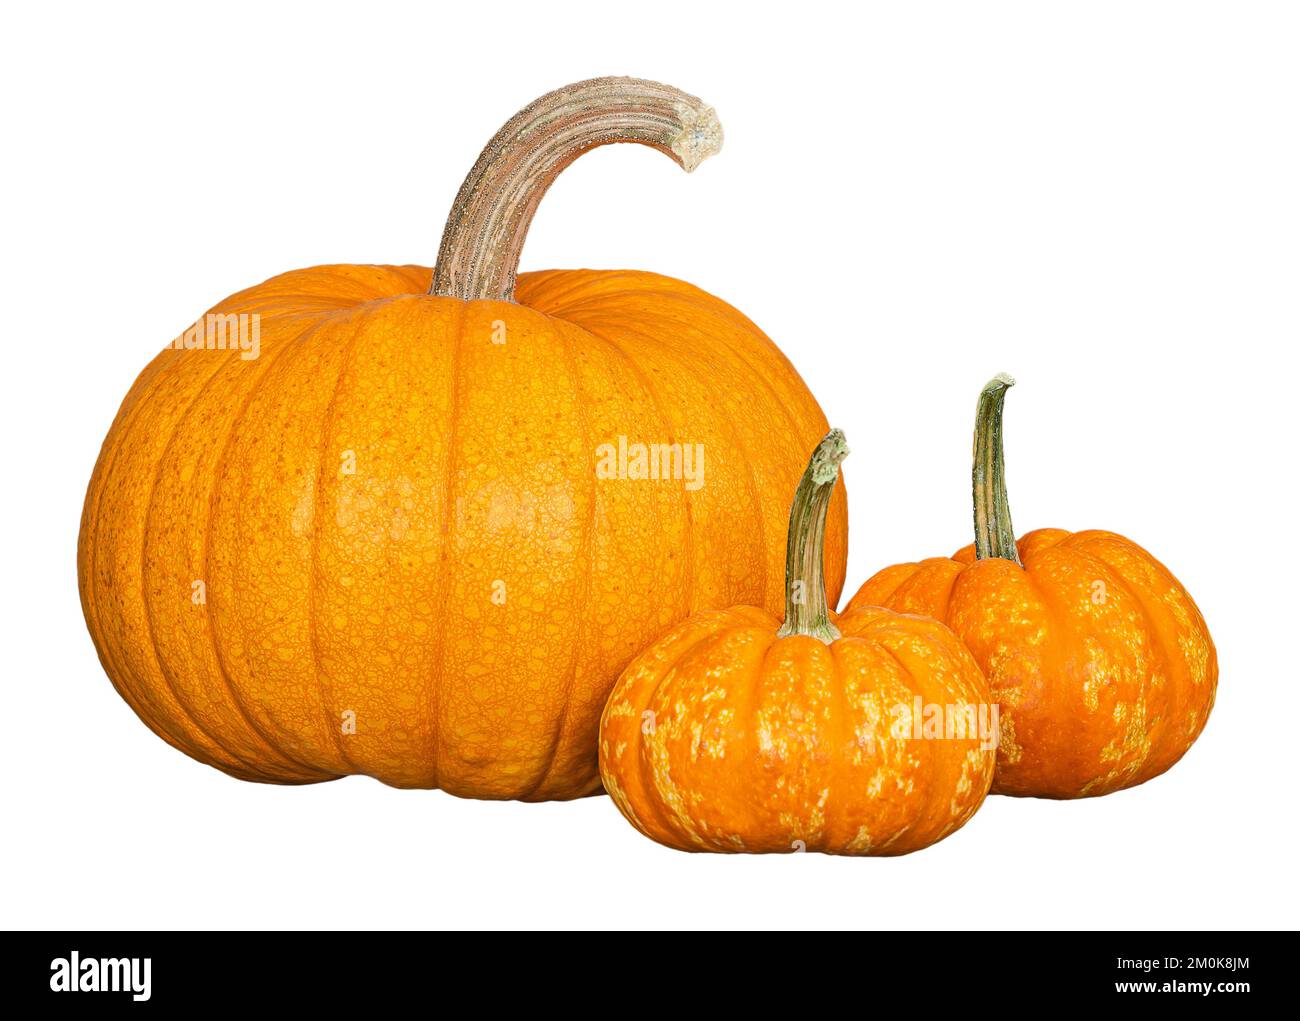 Organic Sugar Pie Pumpkin, an ideal pumpkin for holiday baking and cooking, and two mini pumpkins. Isolated on white background. Stock Photo